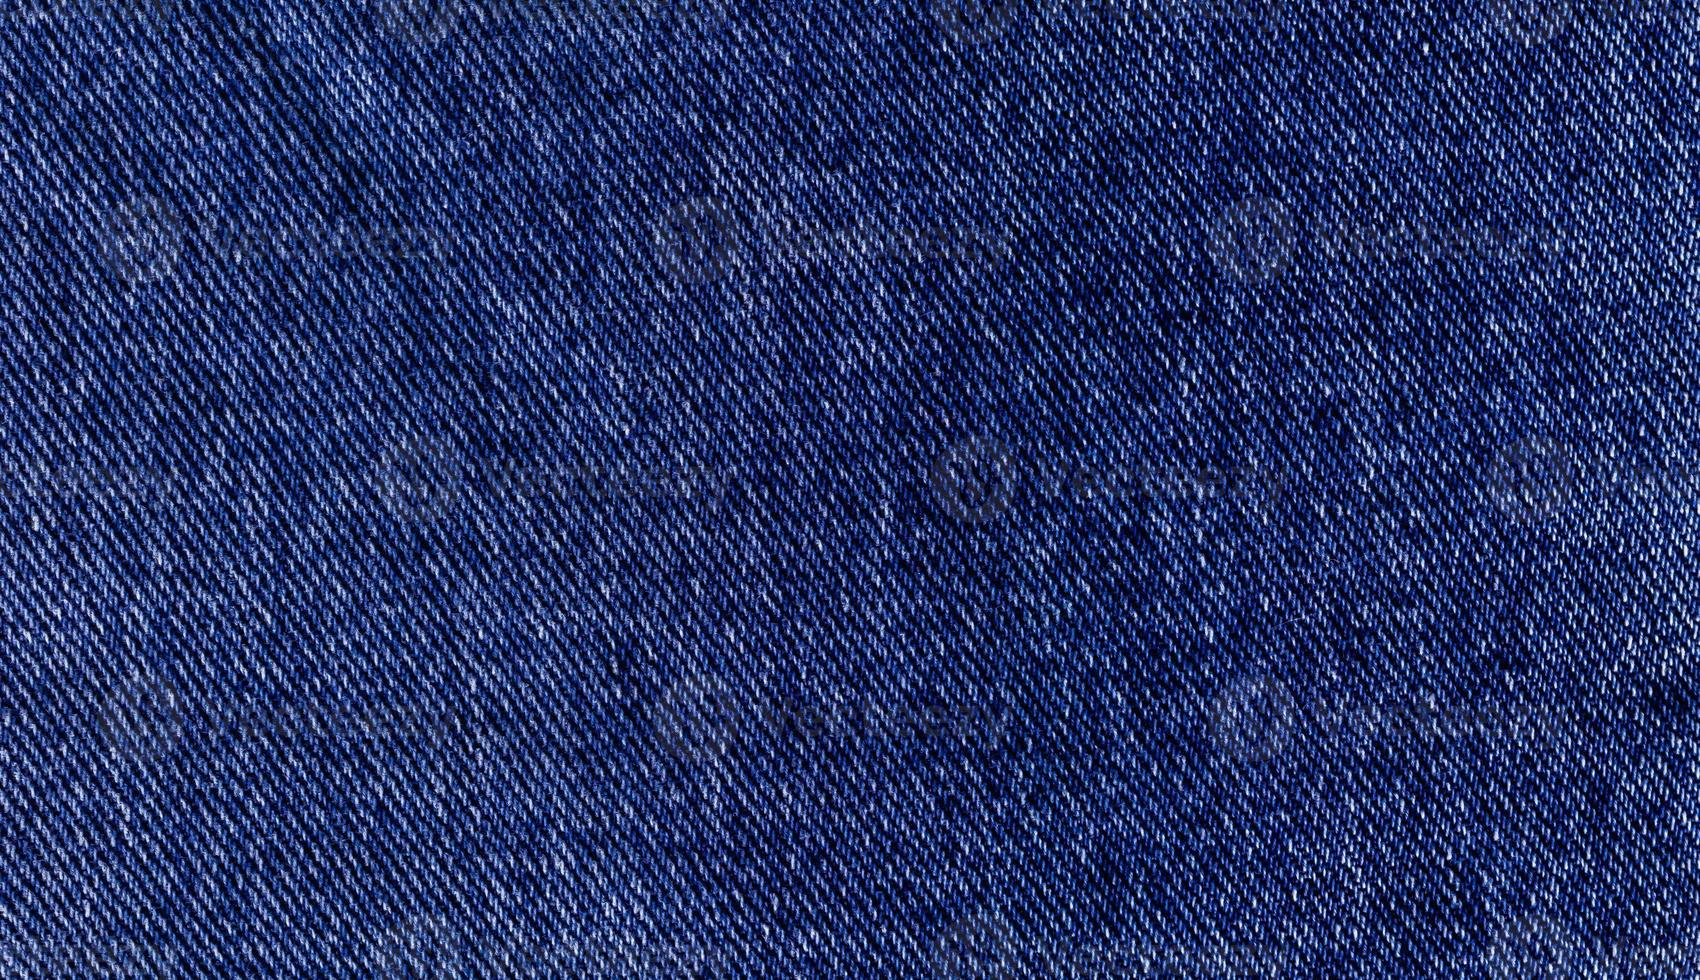 Blue rectangle, background of textured jeans material 2731507 Stock Photo at Vecteezy